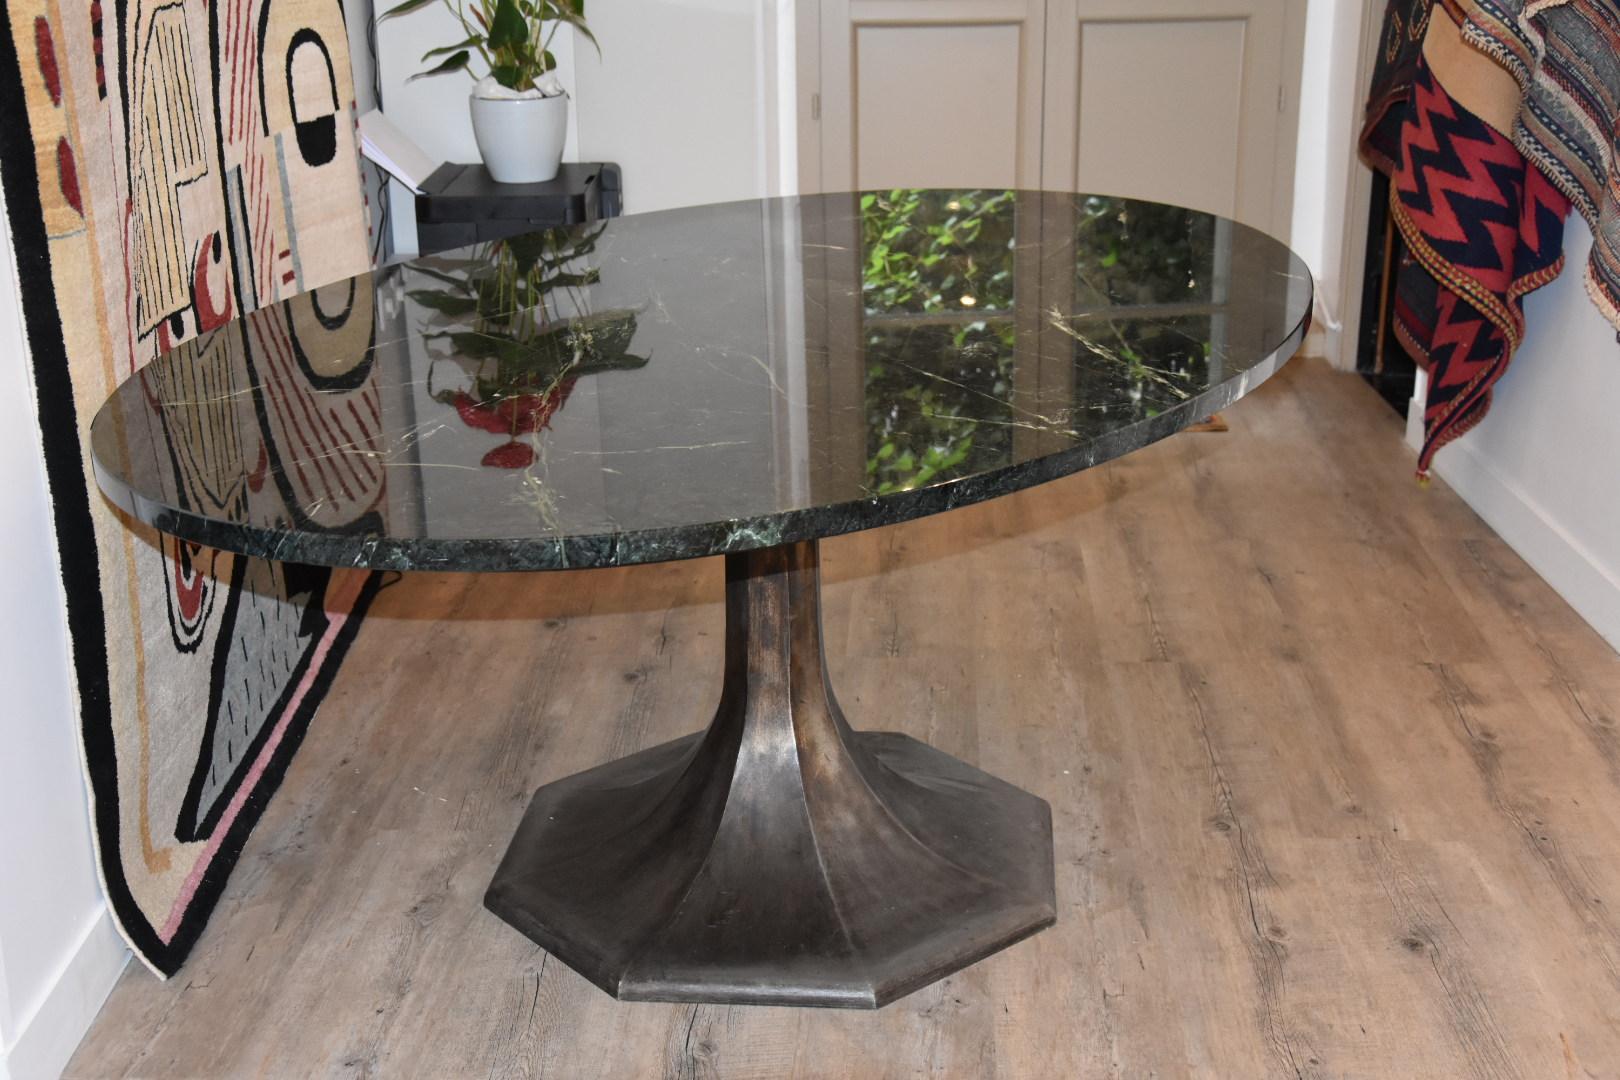 Unique, one of a kind dining table made of beautiful black marble and stainless steel, which was made by a famous French Ironworker. There is only one in the world because it was hand-crafted by the demand of Maison Tahissa.
